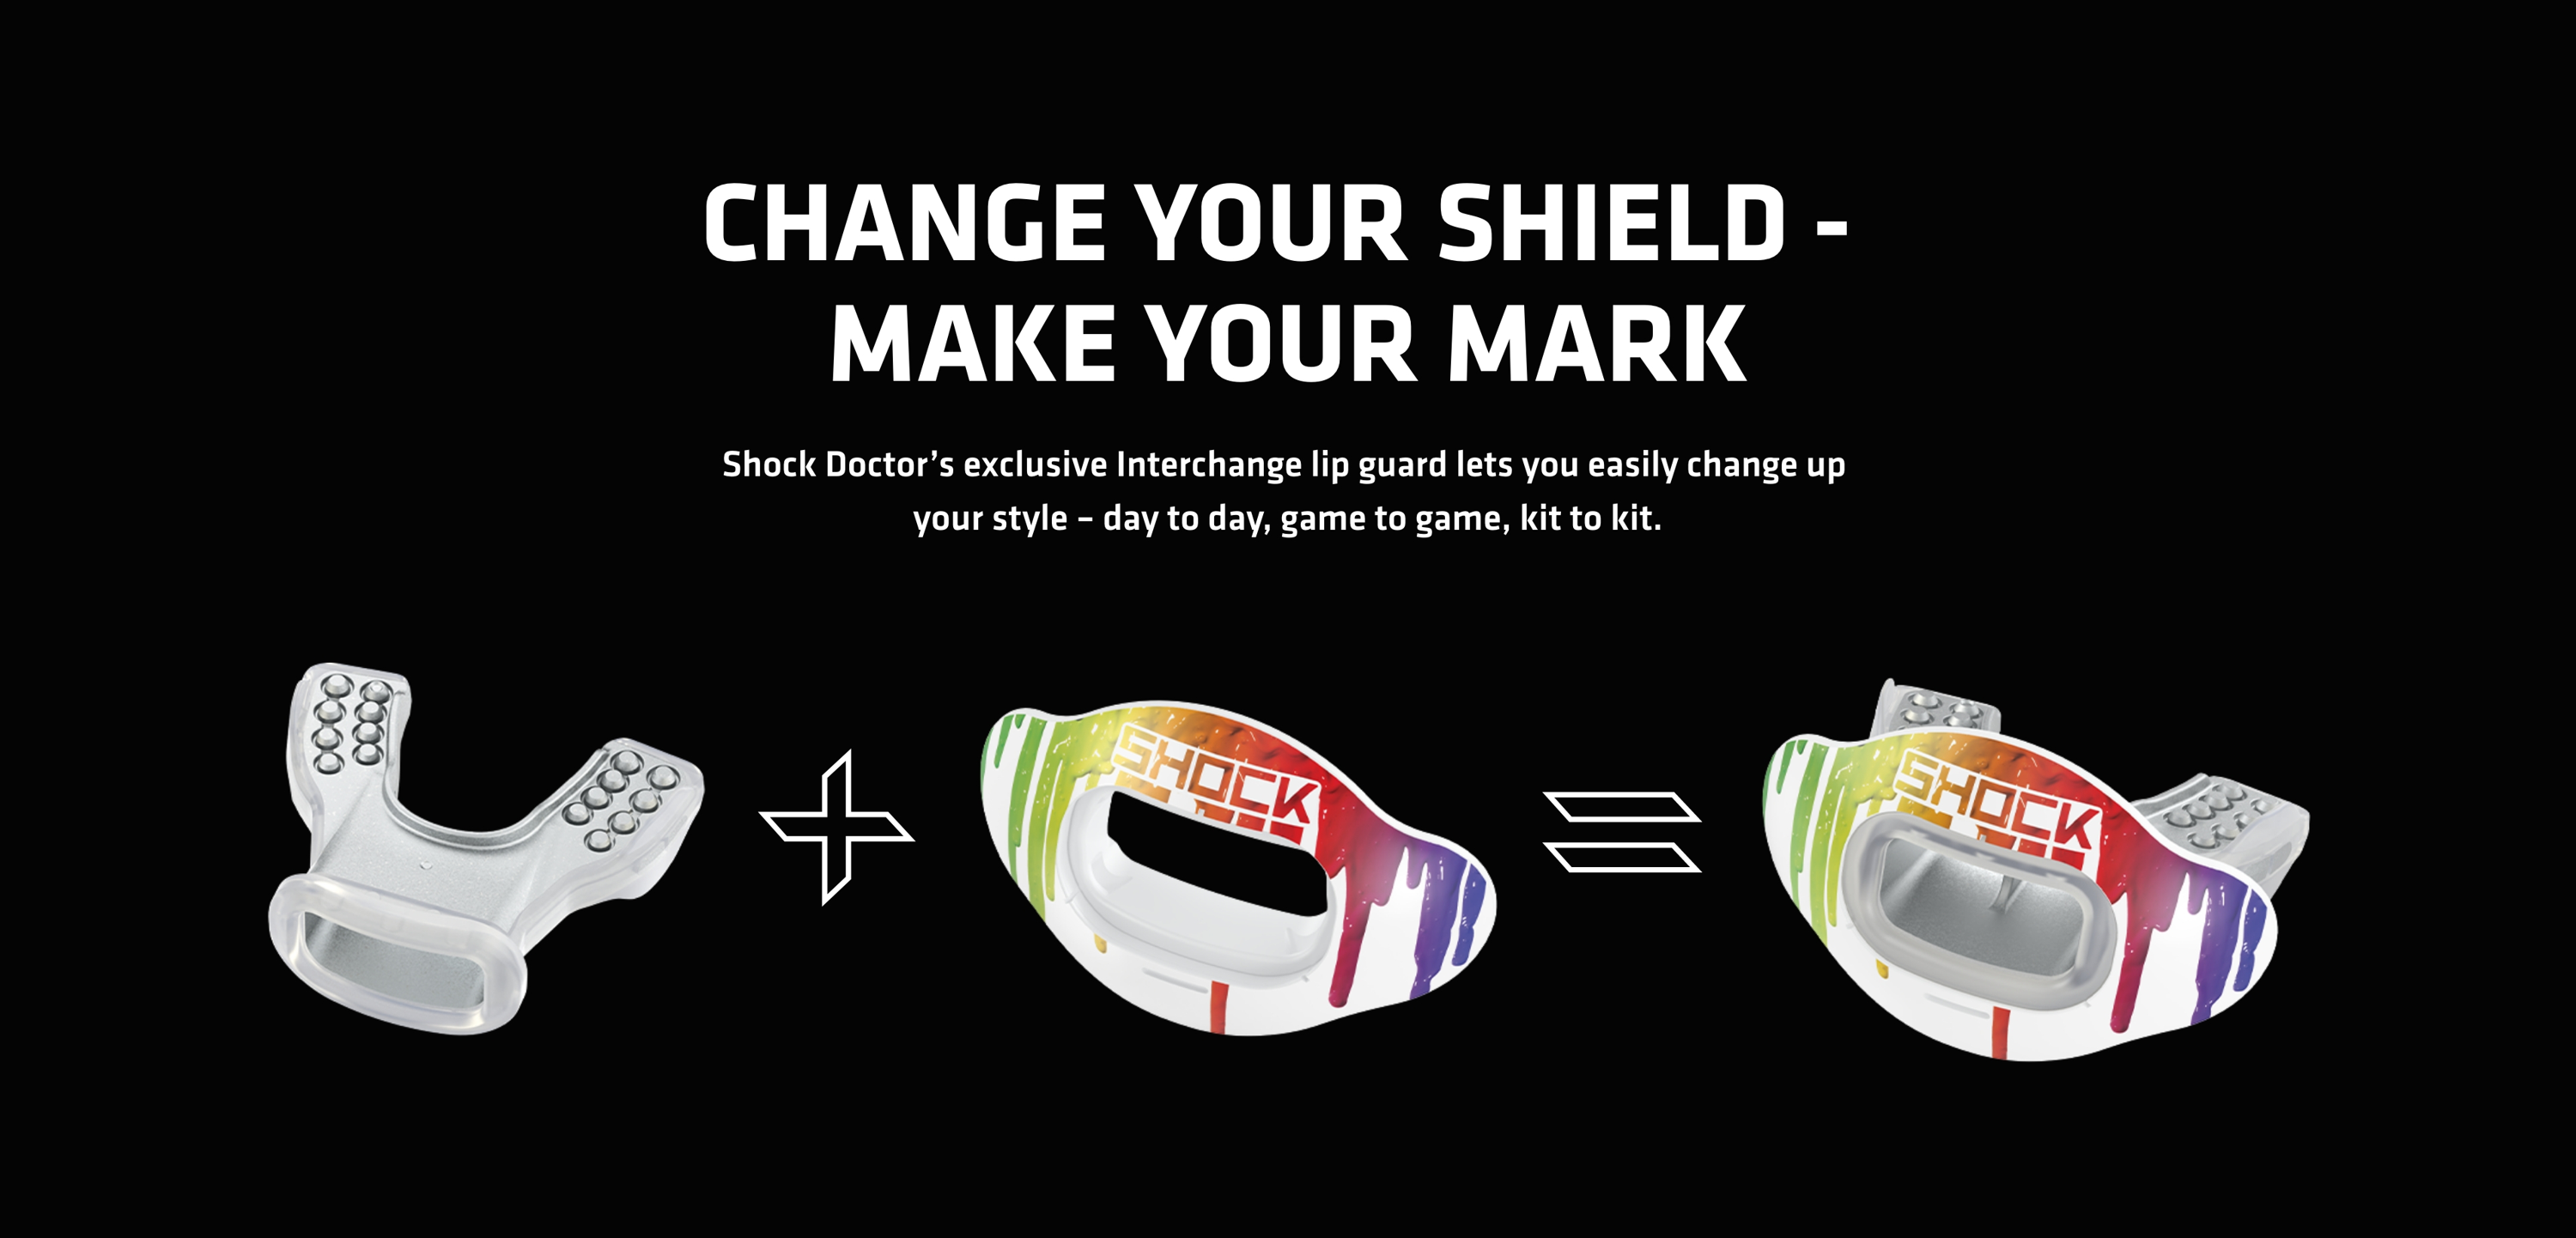 Change your shield - make your mark. Shock Doctors exclusive interchange lip guard let's you easily change up your style - day to day, game to game, kit to kit.